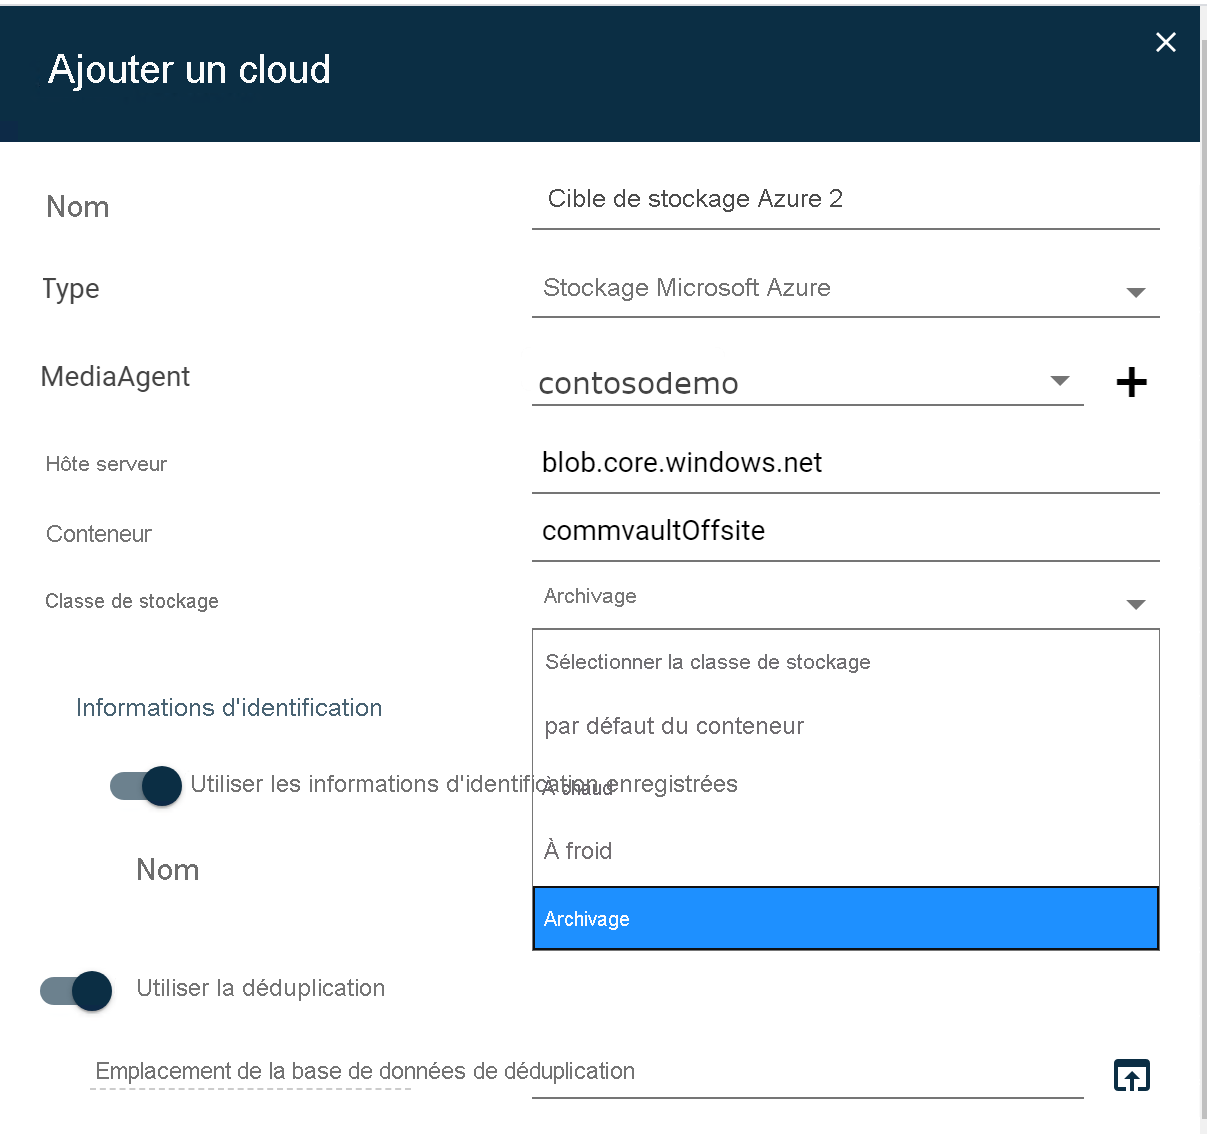 Screenshot of Commvault's Add cloud user interface. In the Archive drop-down menu, Archive is selected.